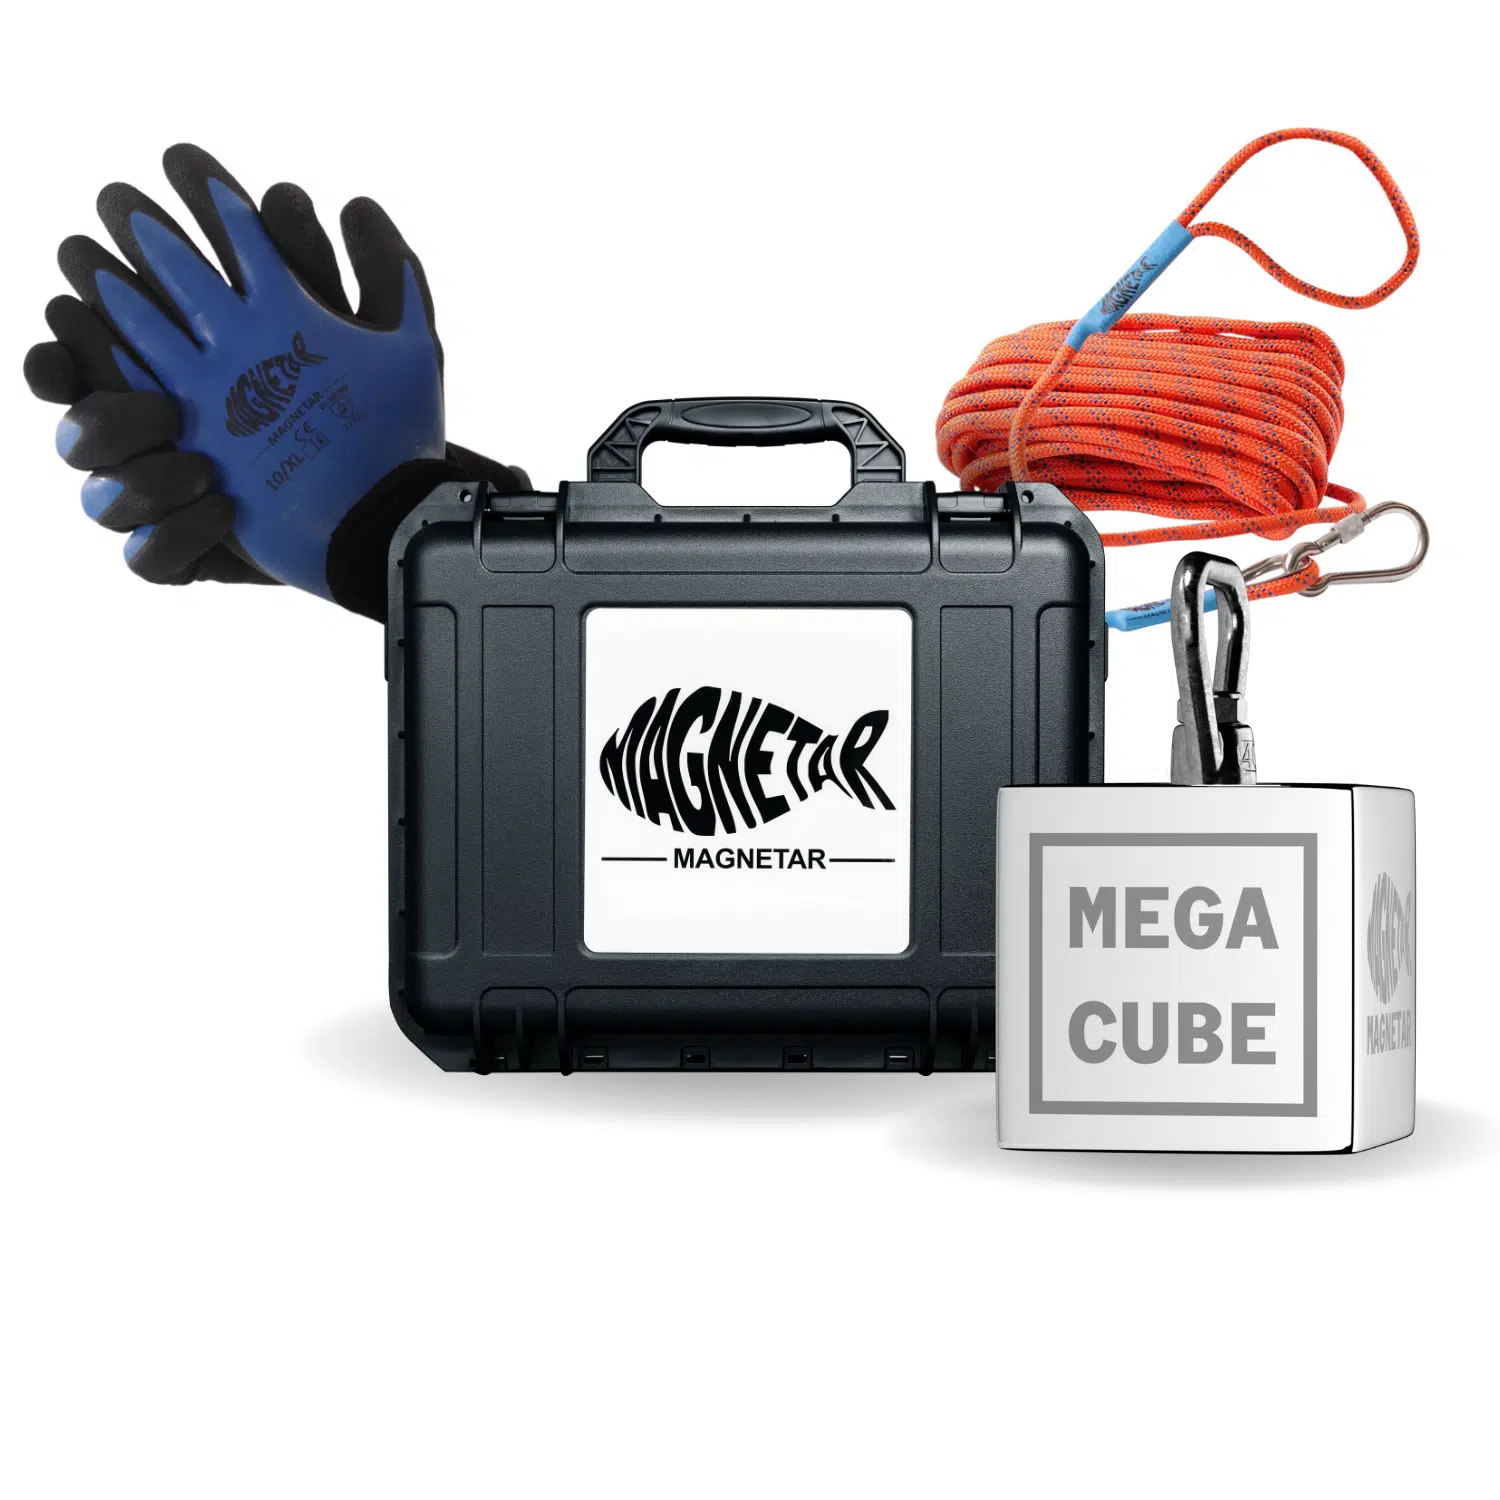 Magnet Fishing Kit, 1000 LB Pulling Magnet with Gloves, Strong